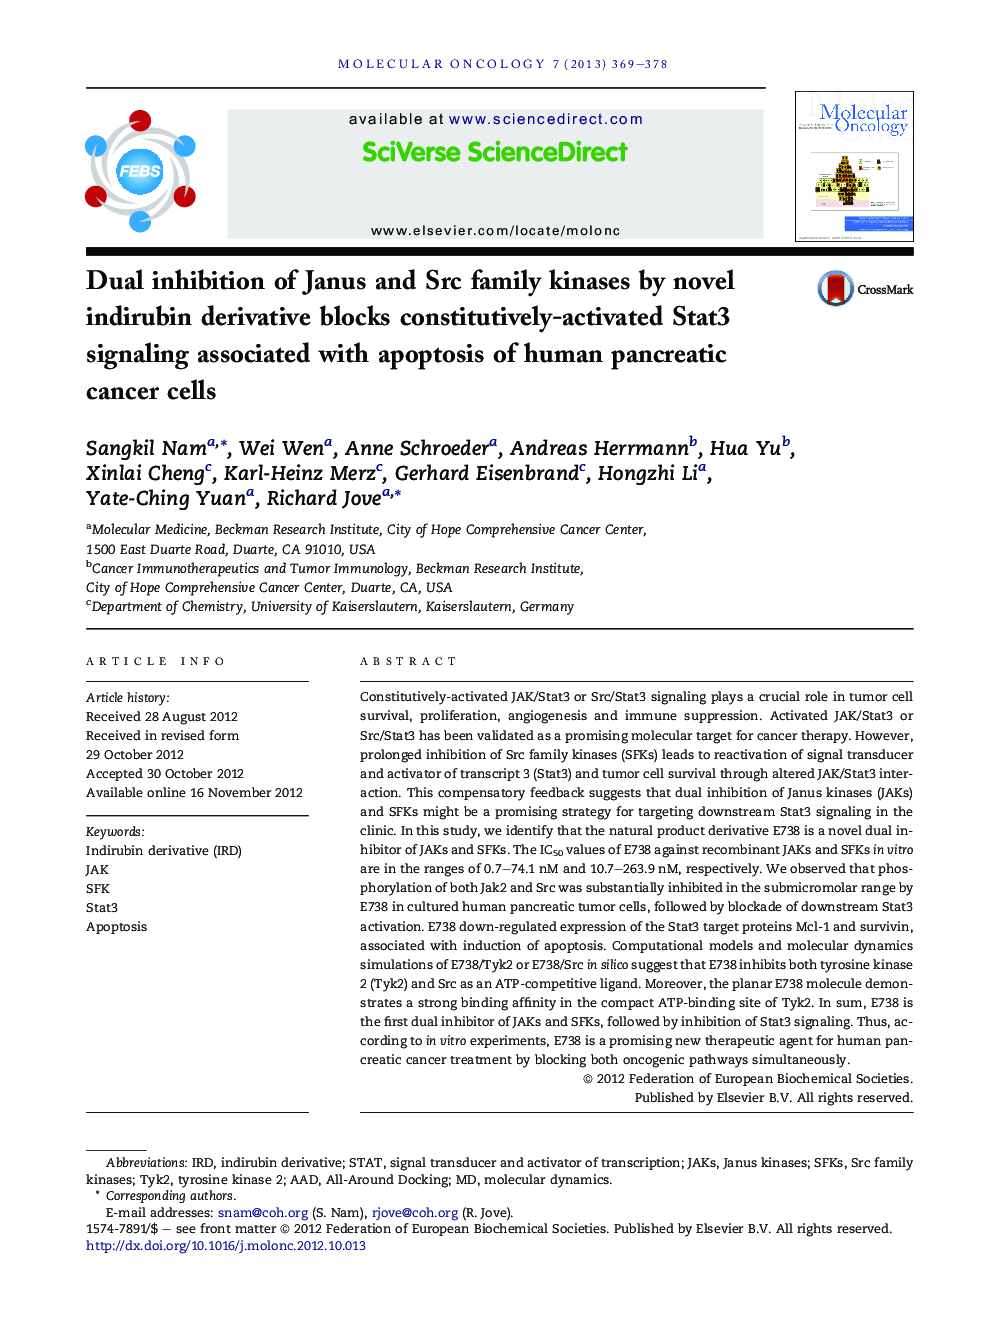 Dual inhibition of Janus and Src family kinases by novel indirubin derivative blocks constitutively-activated Stat3 signaling associated with apoptosis of human pancreatic cancer cells